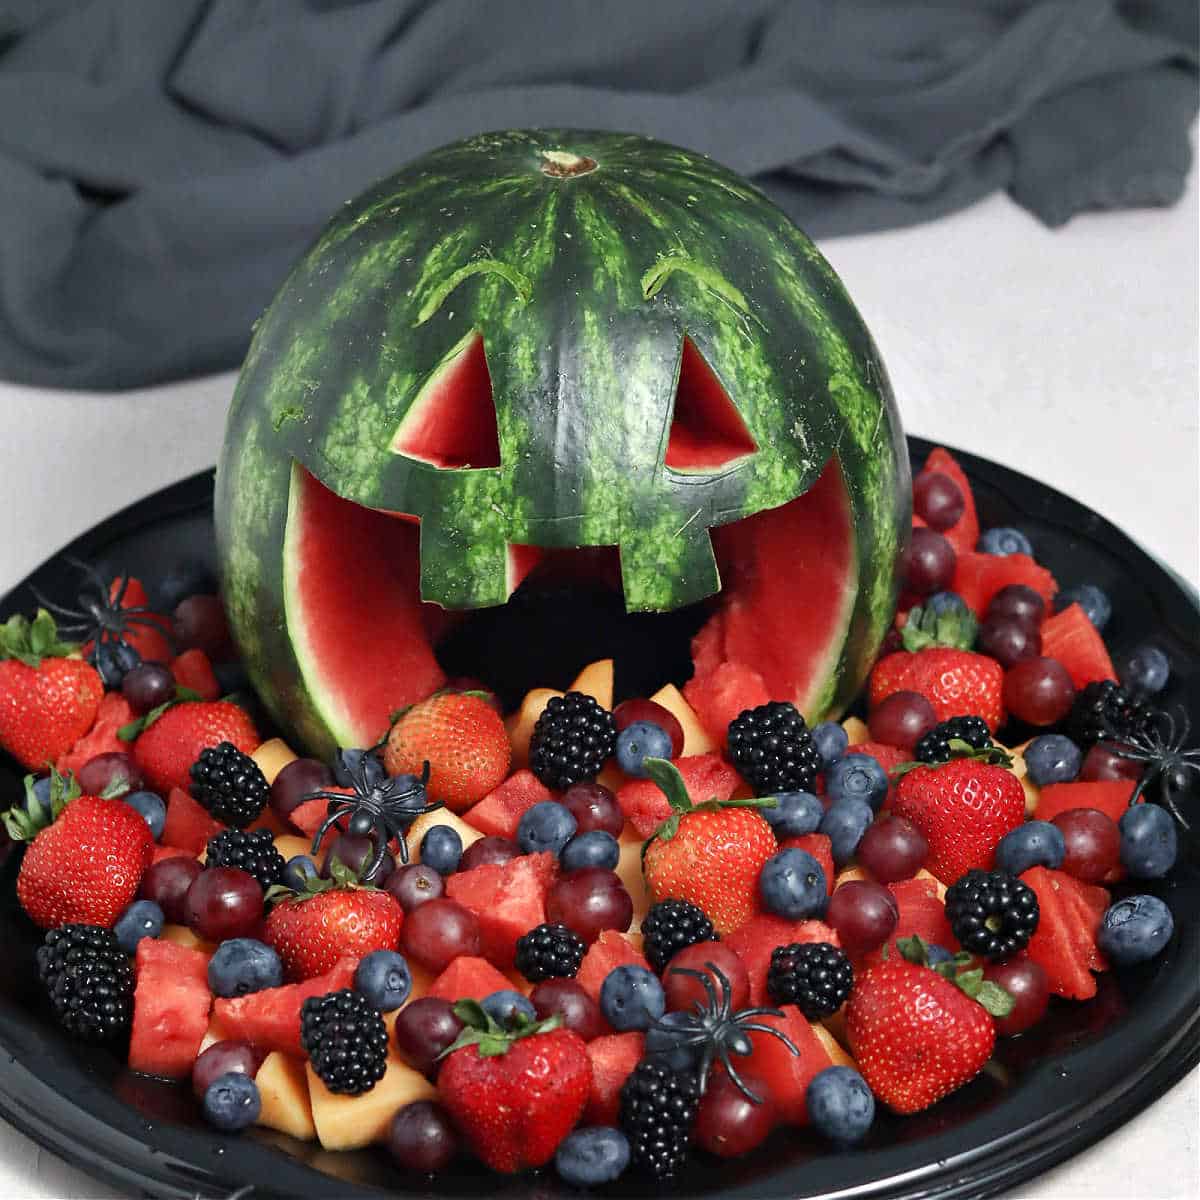 Fruit salad coming out of a watermelon jack-o-lantern.